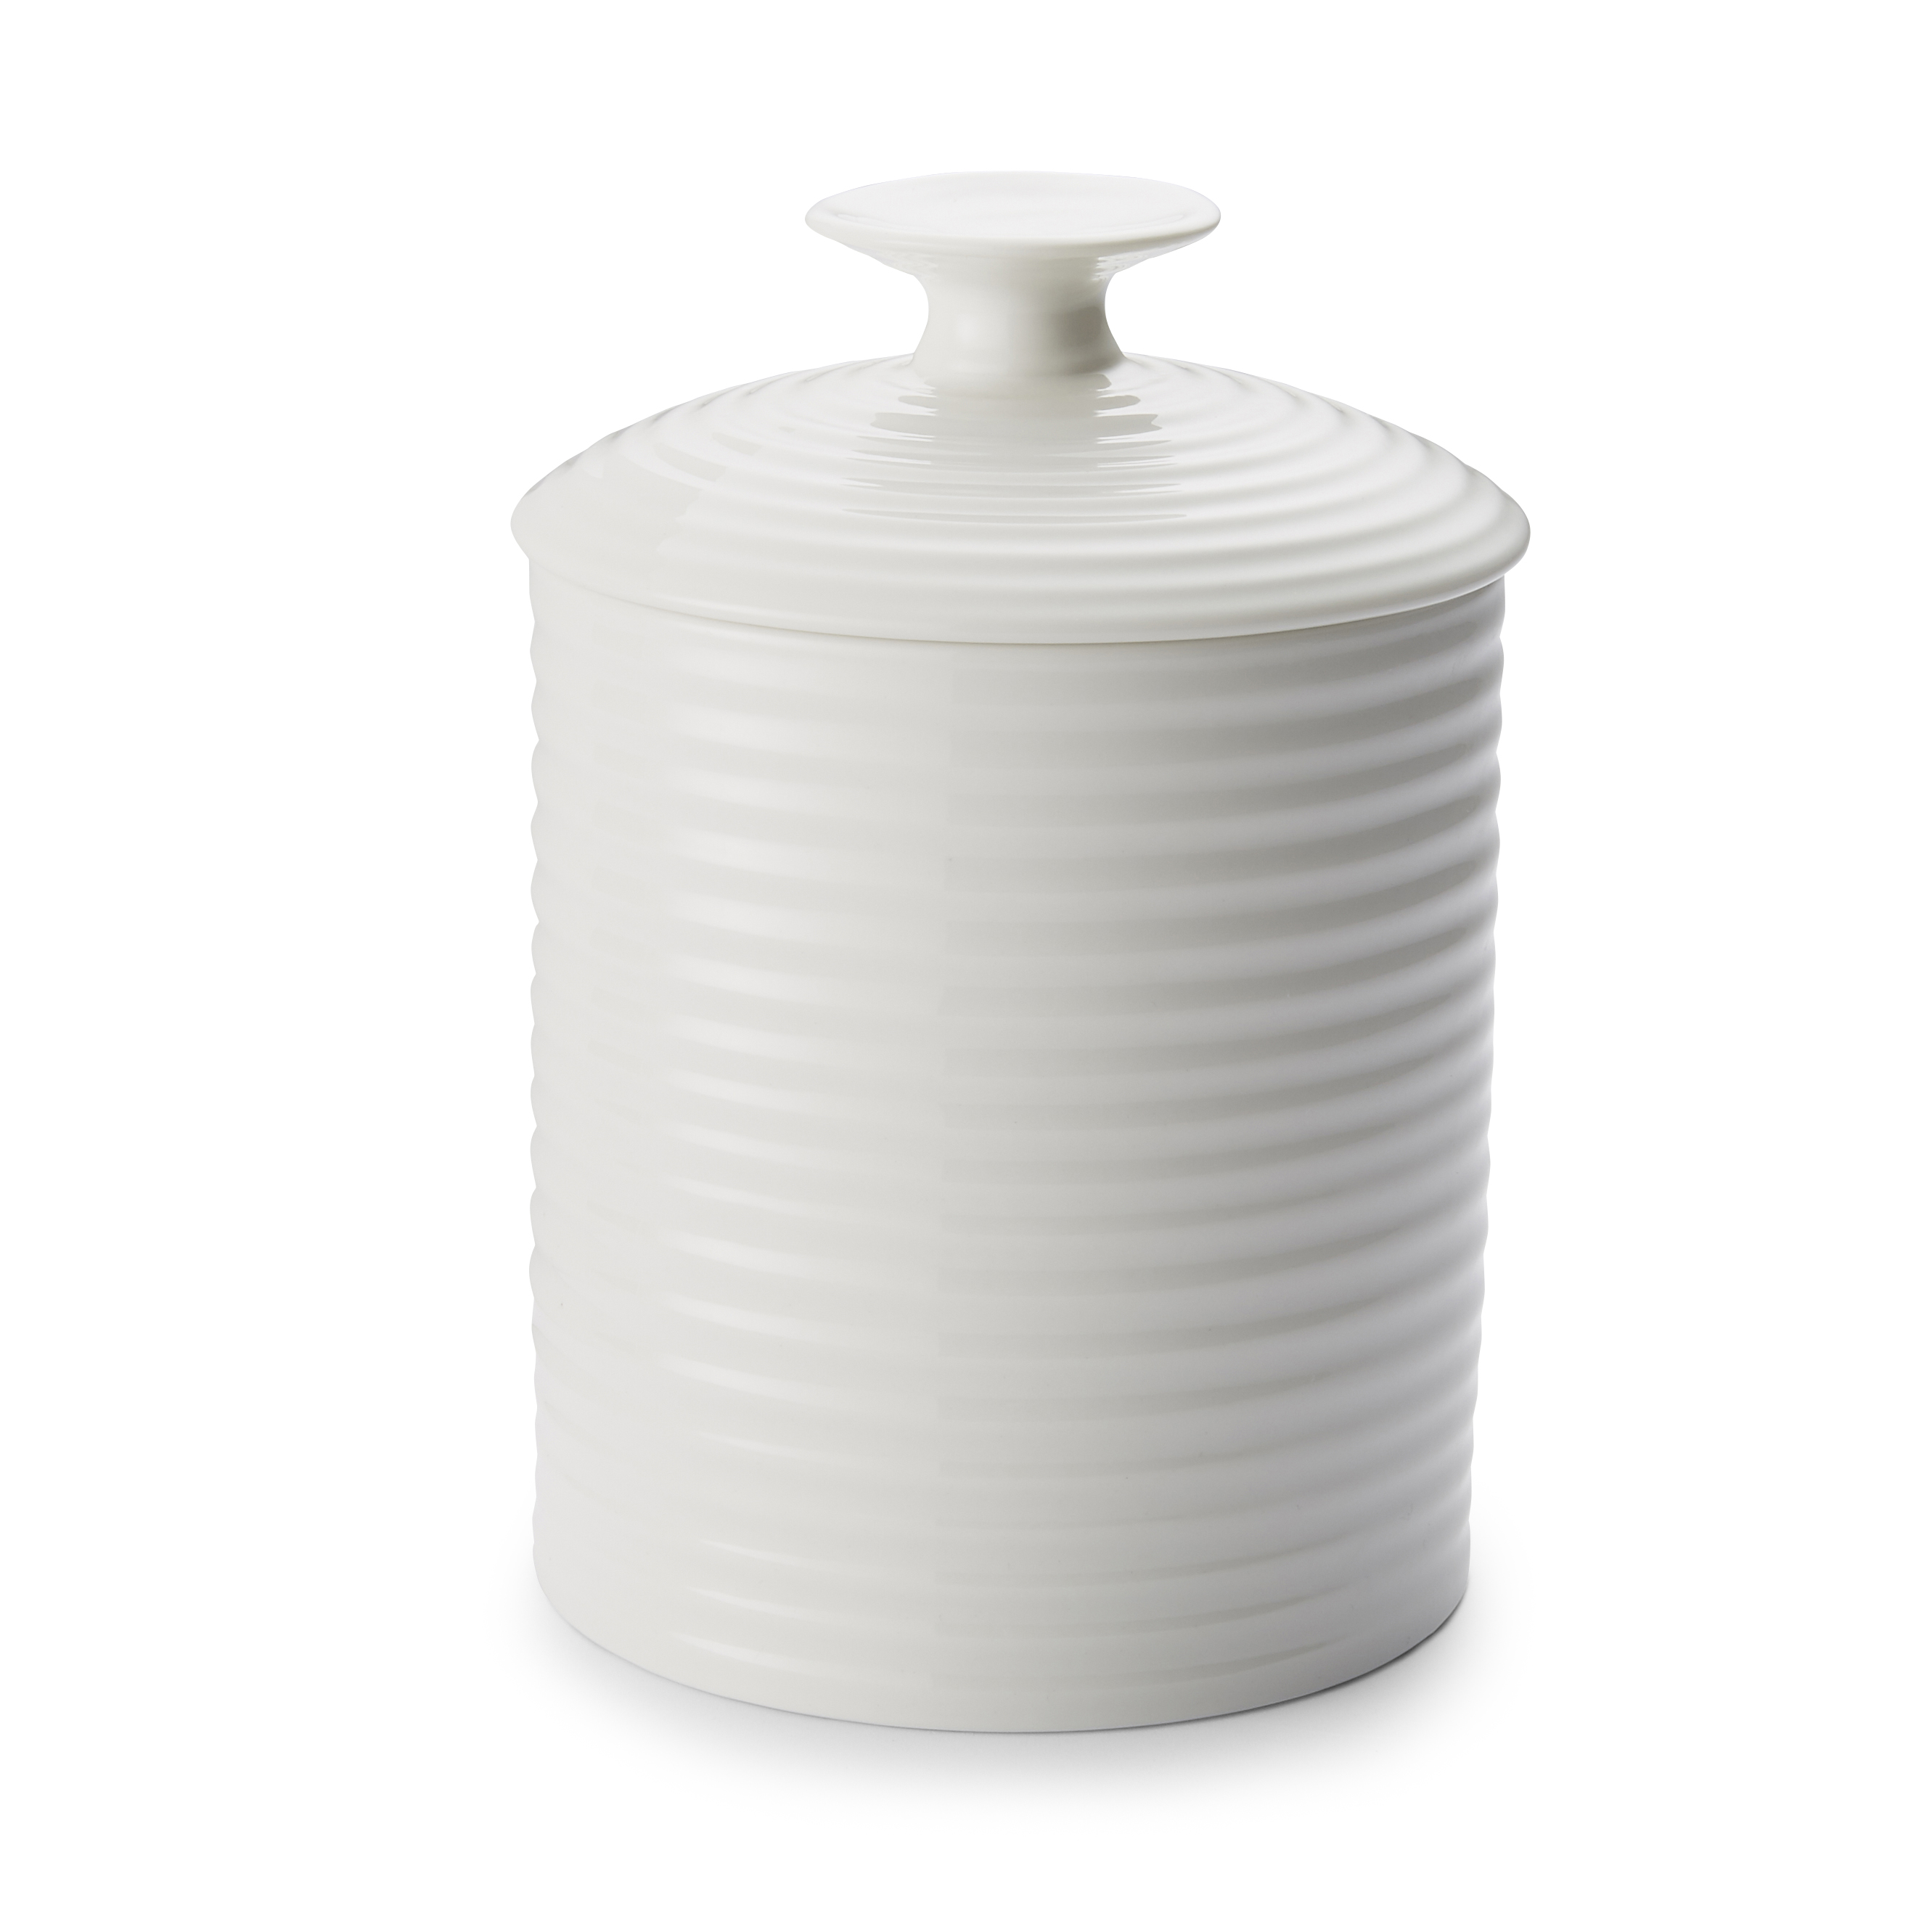 Portmeirion Sophie Conran White Medium Canister image number null